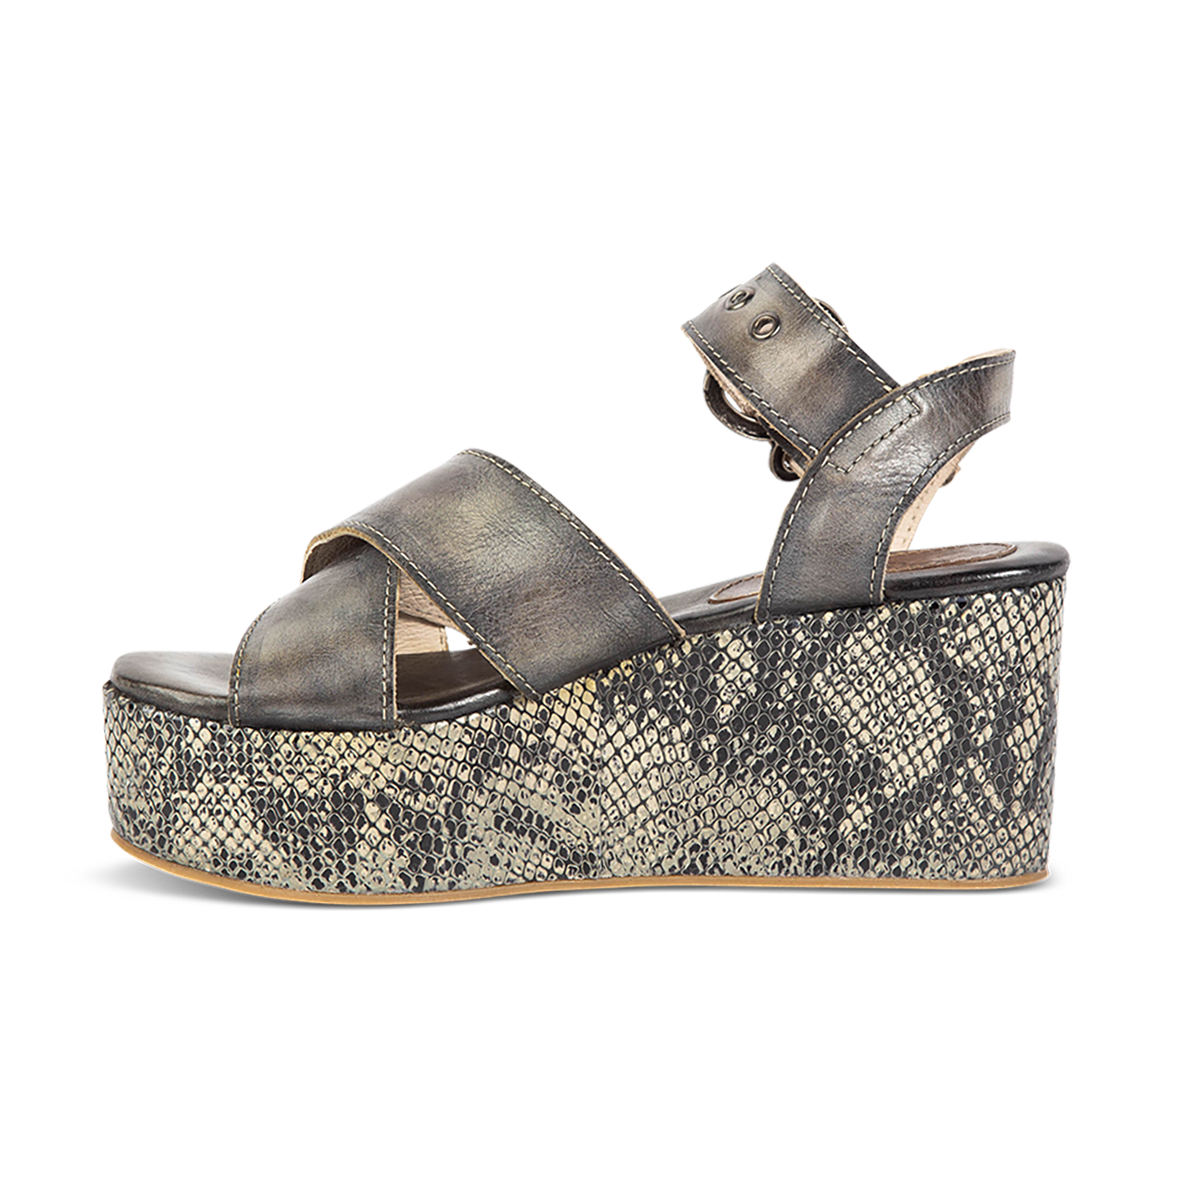 Inside view showing heel and straps on FREEBIRD women's Larae olive snake wedge sandal with platform heel and an adjustable ankle strap